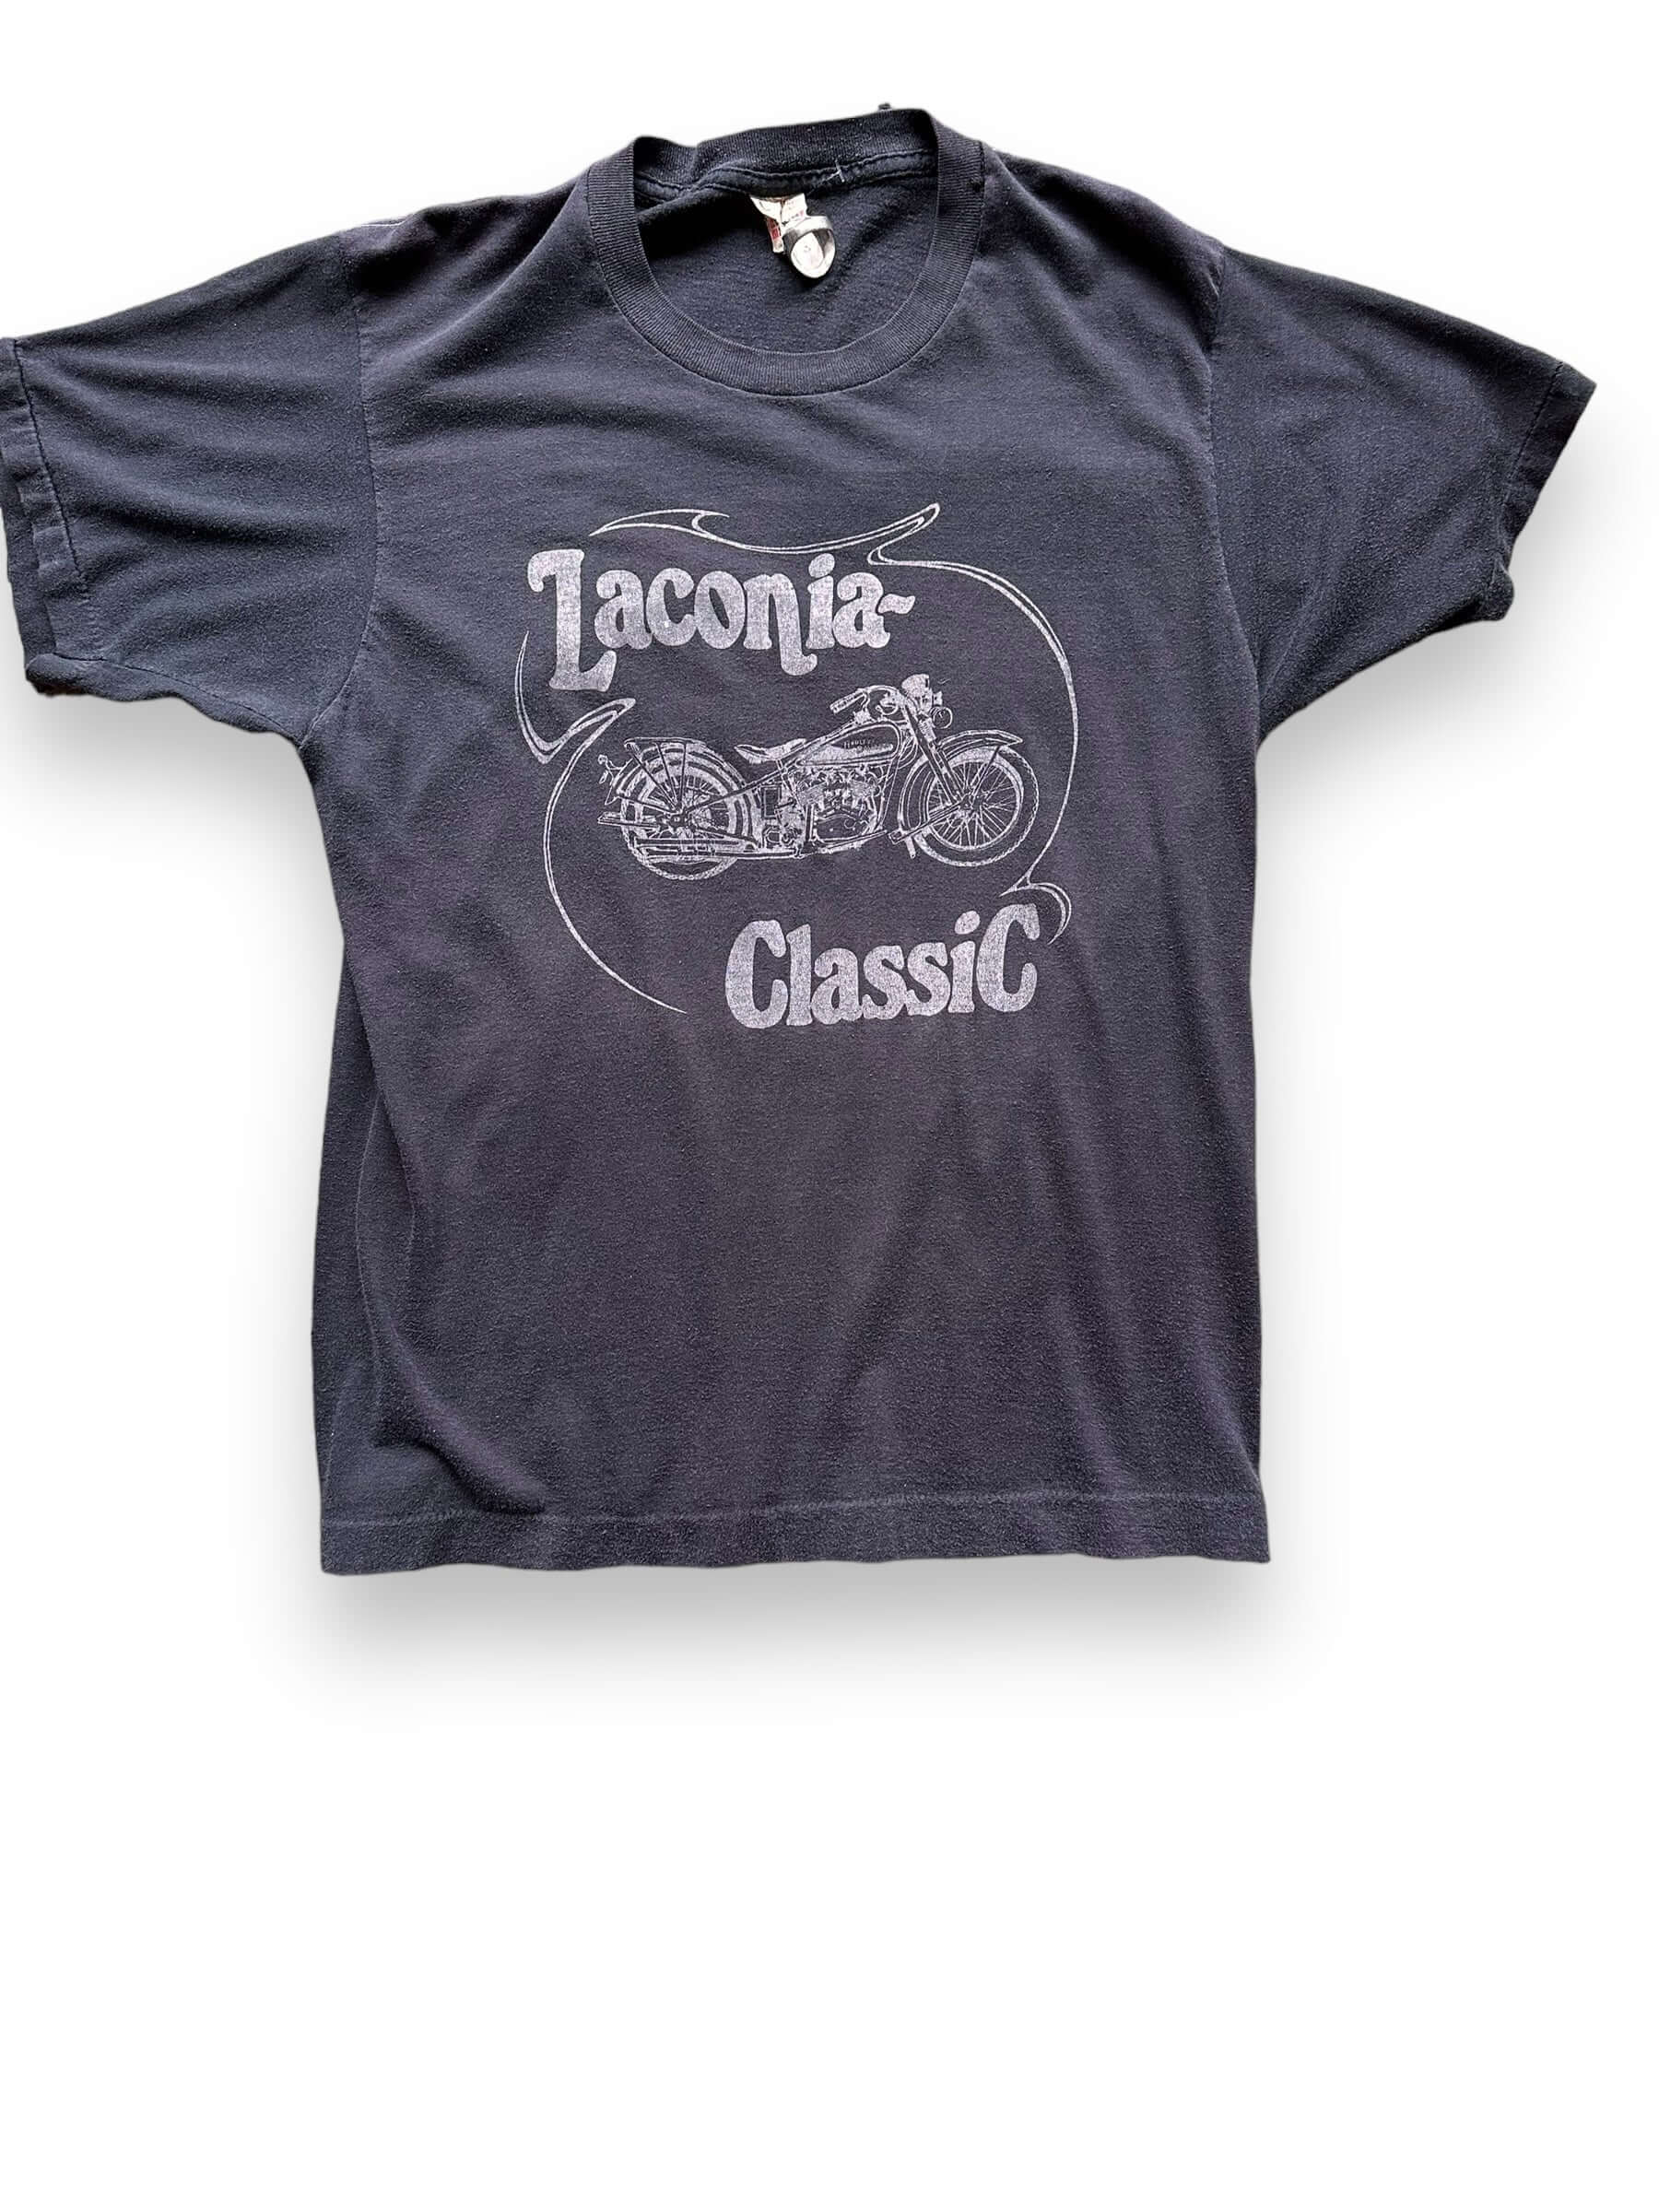 Front Detail of Vintage Laconia Motorcycle Classic Tee SZ L | Vintage Harley Tee Seattle